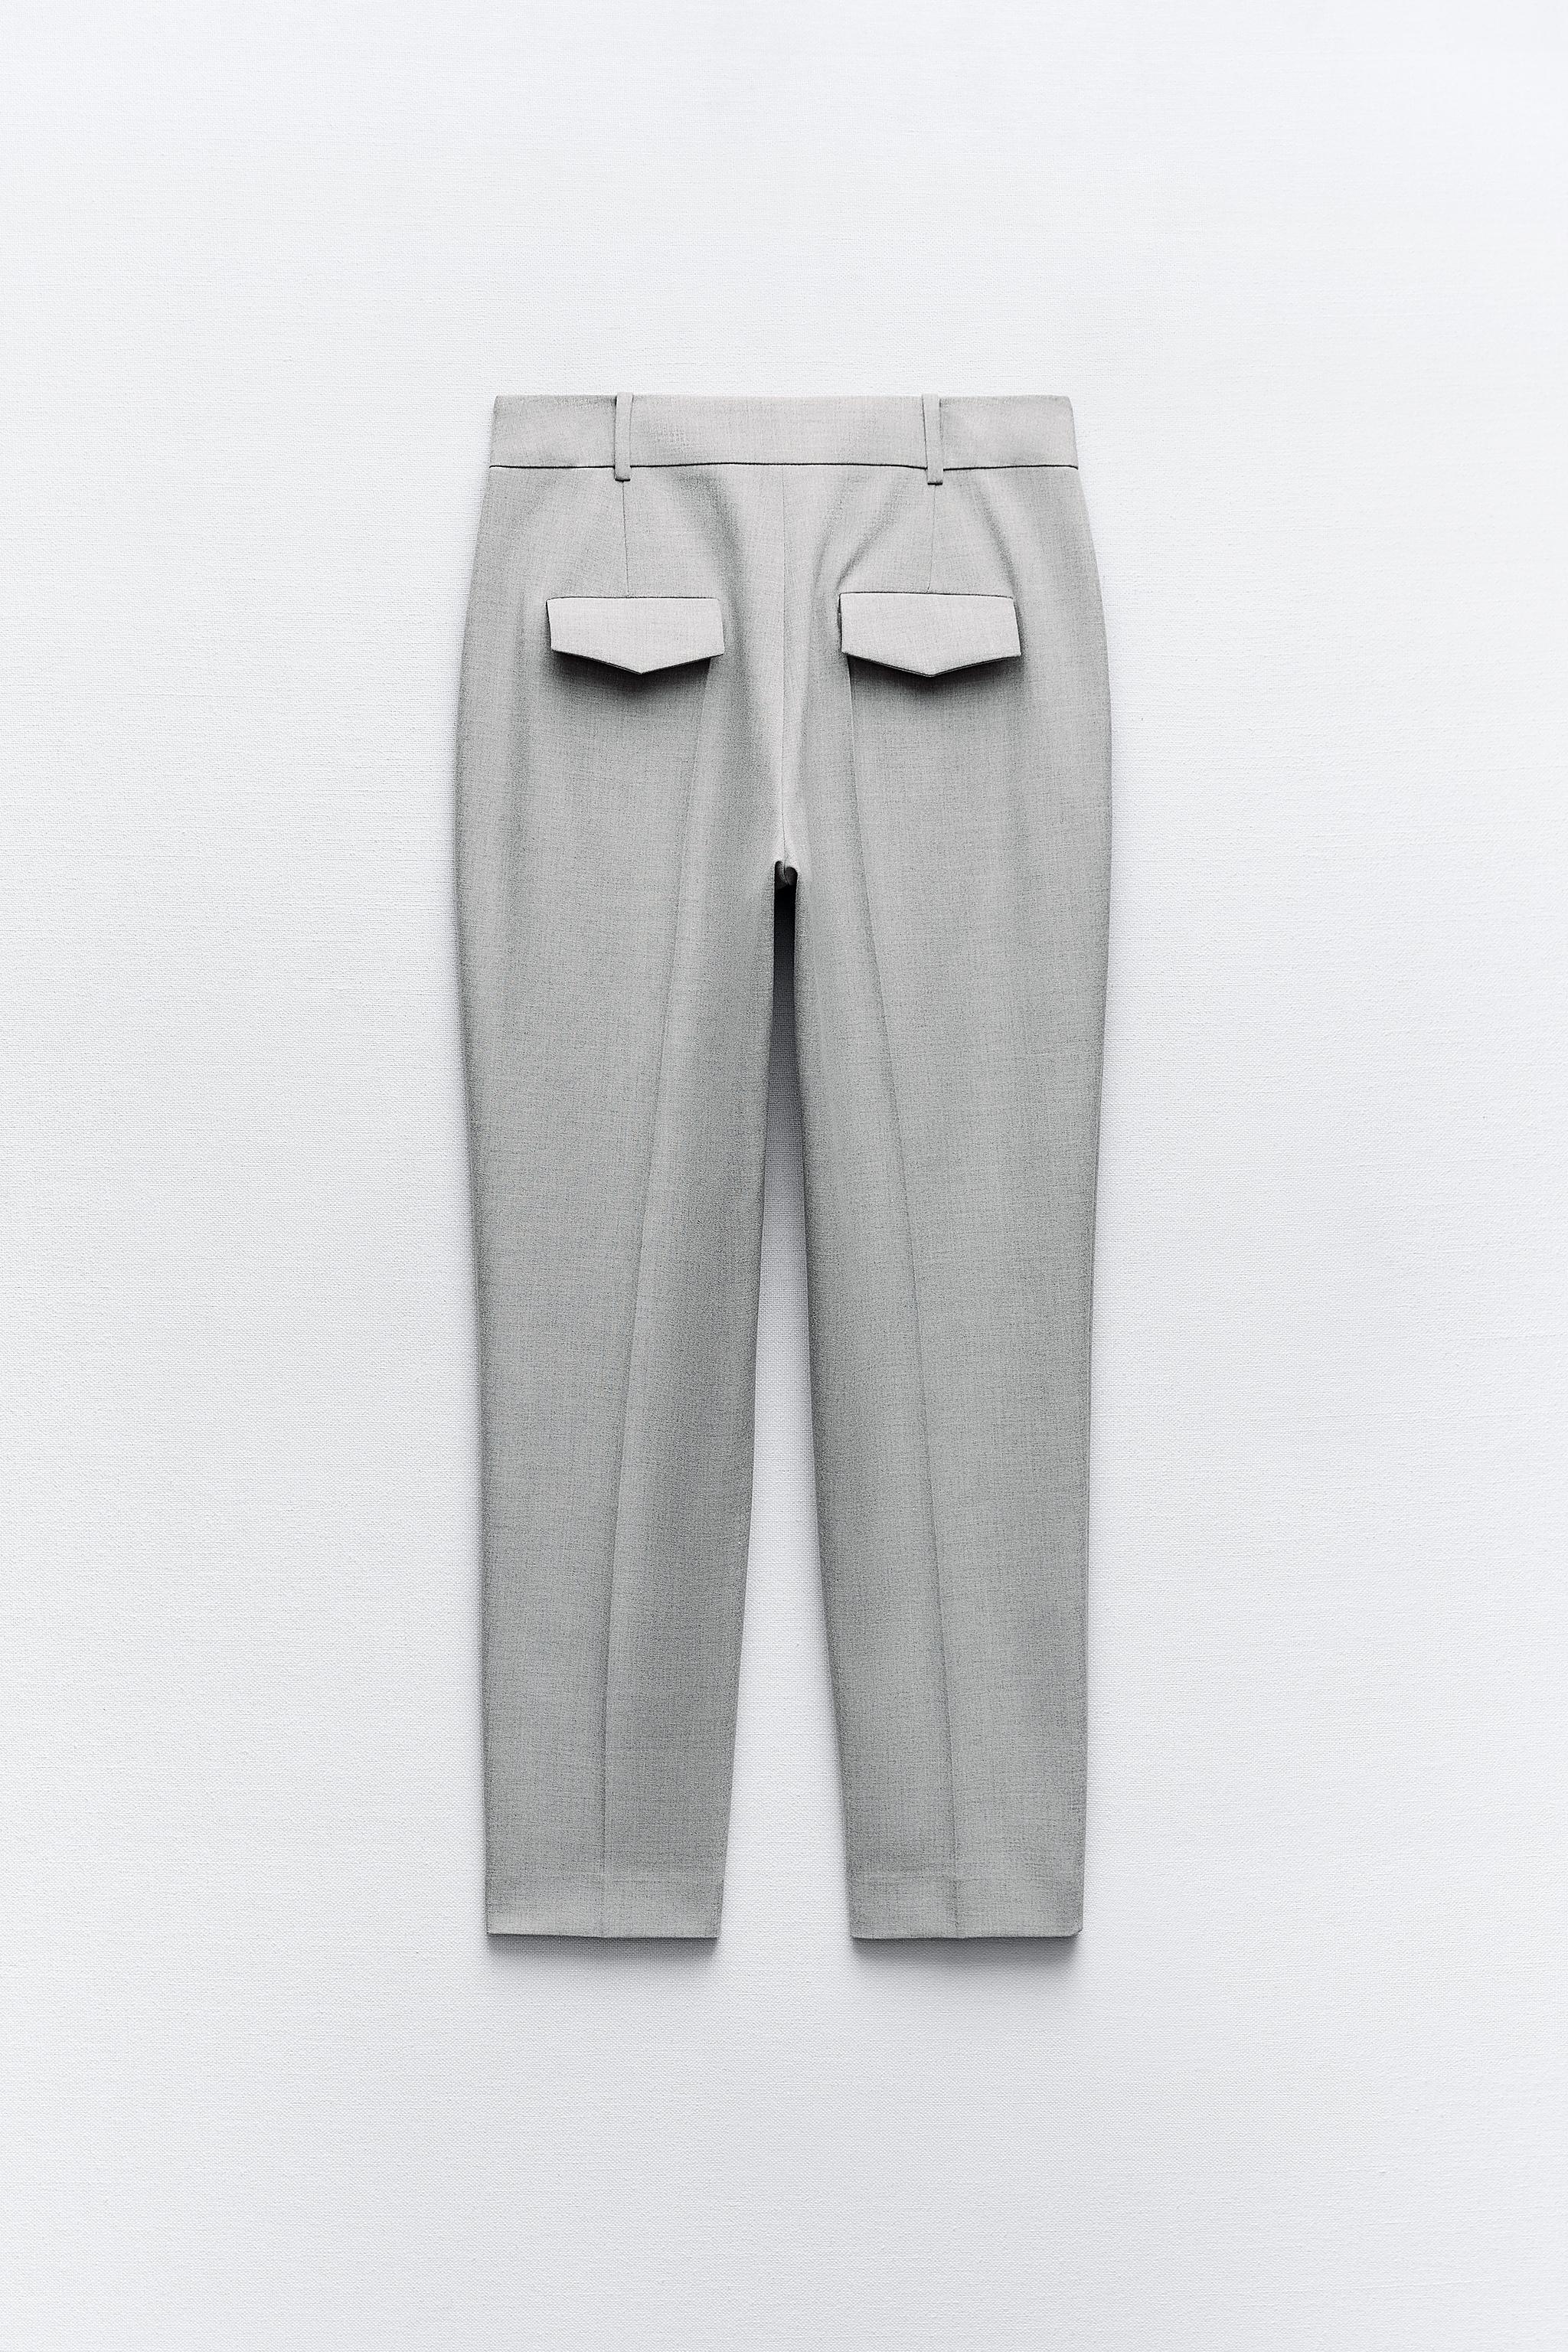 NWT New Zara Grey Pants With Side Vents Size M